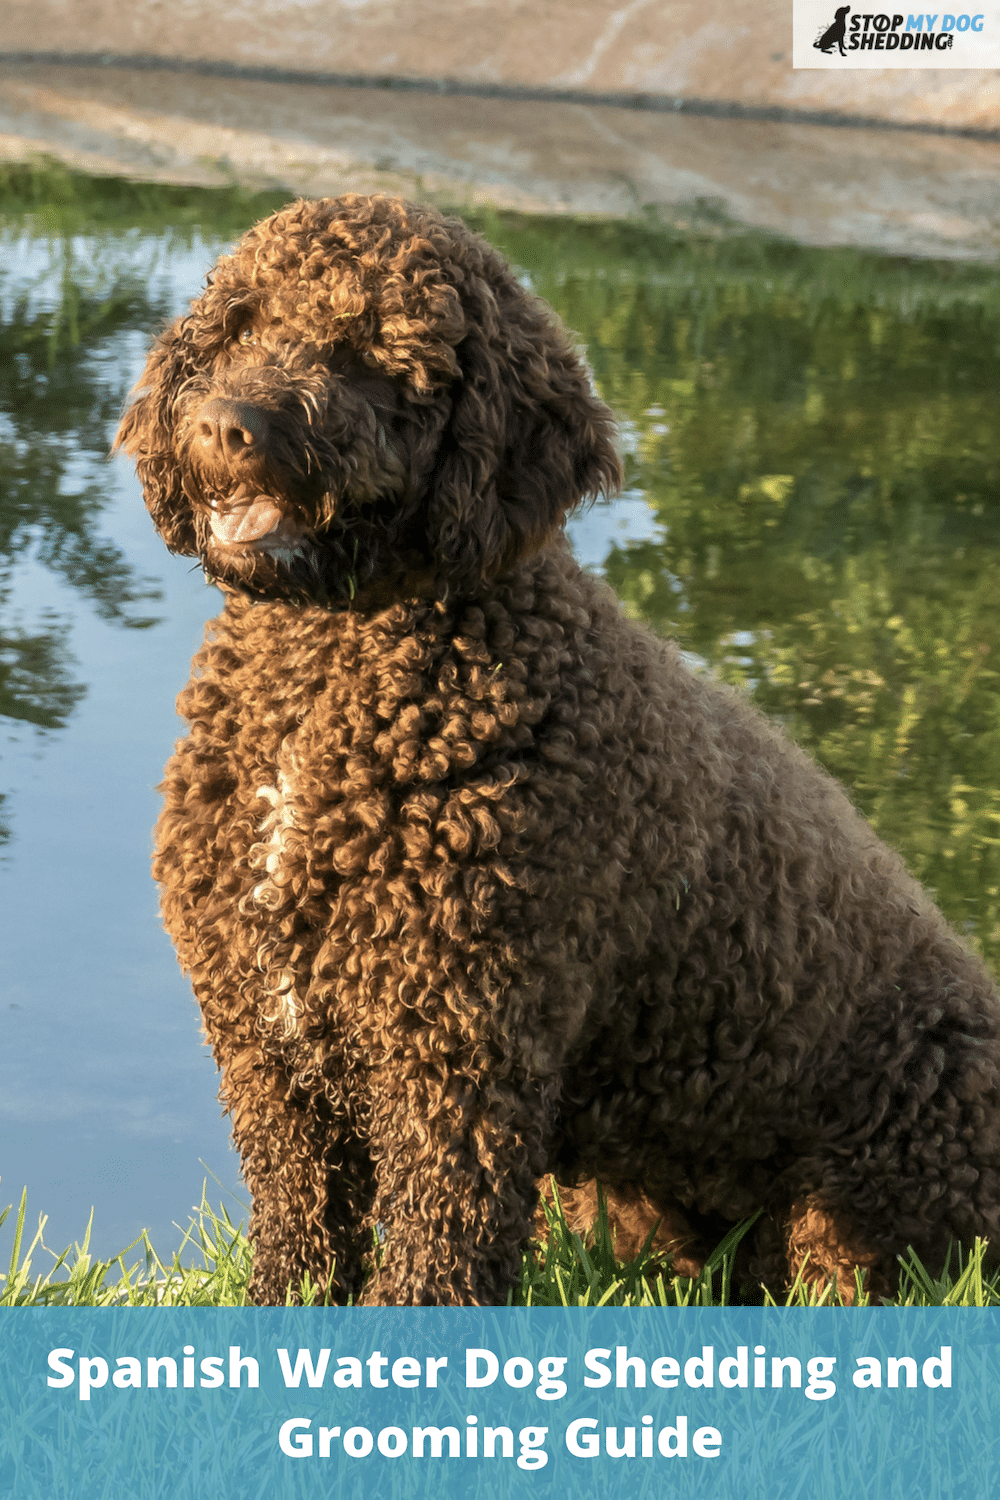 Do Spanish Water Dogs Shed? (SWD Shedding Guide)